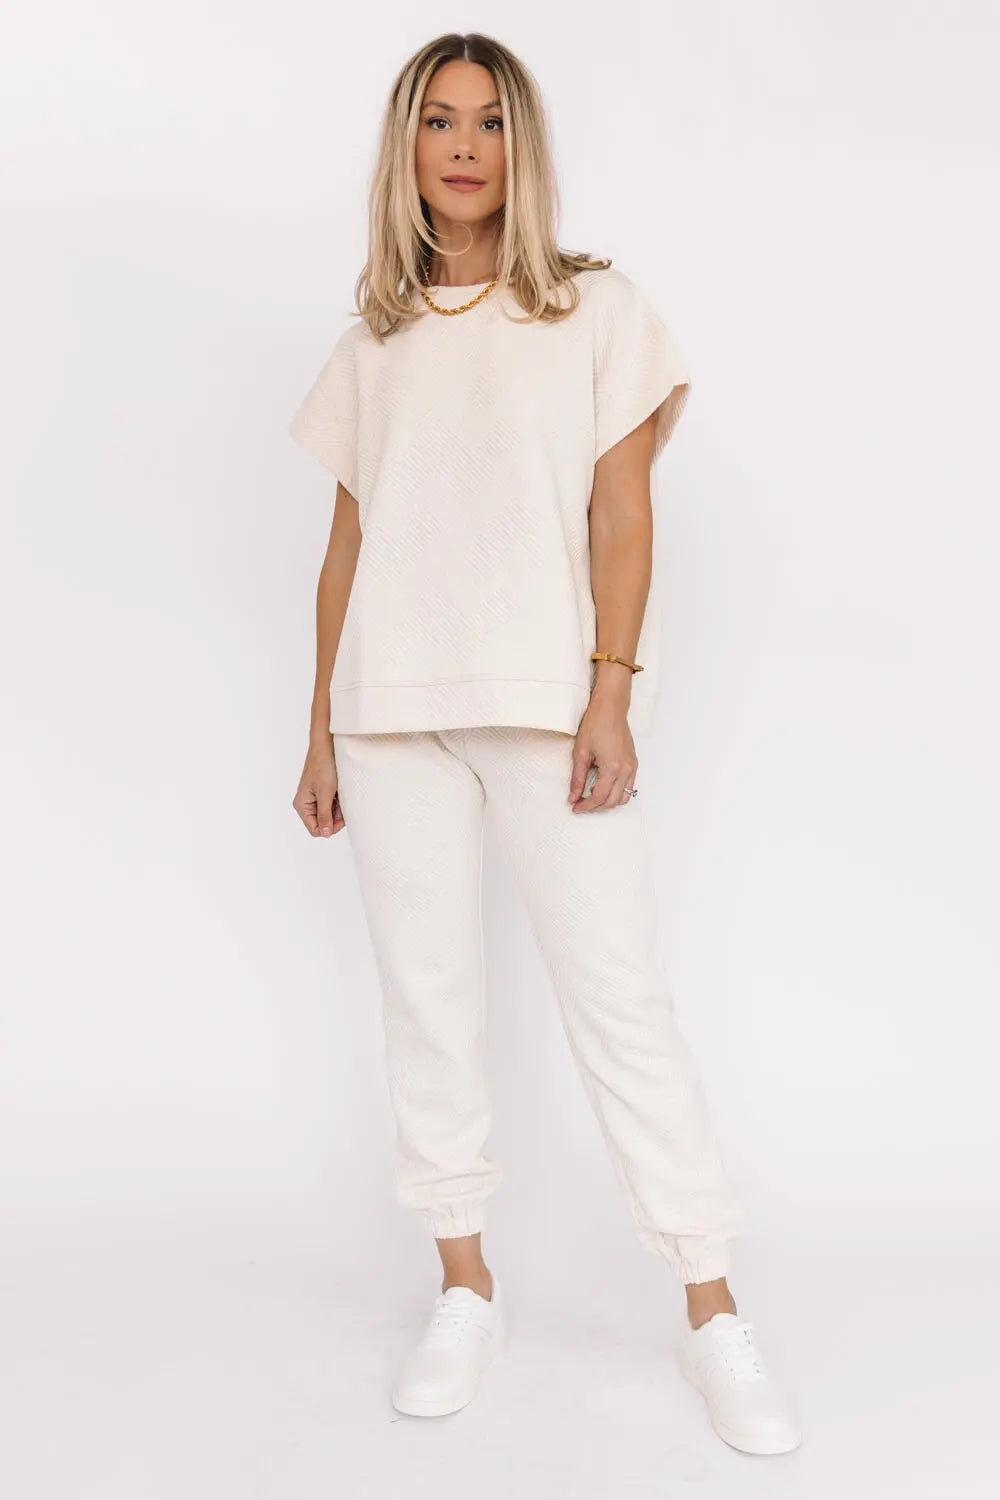 Weekend Vibe Cream Textured Sweater Top 162 SS TOPS